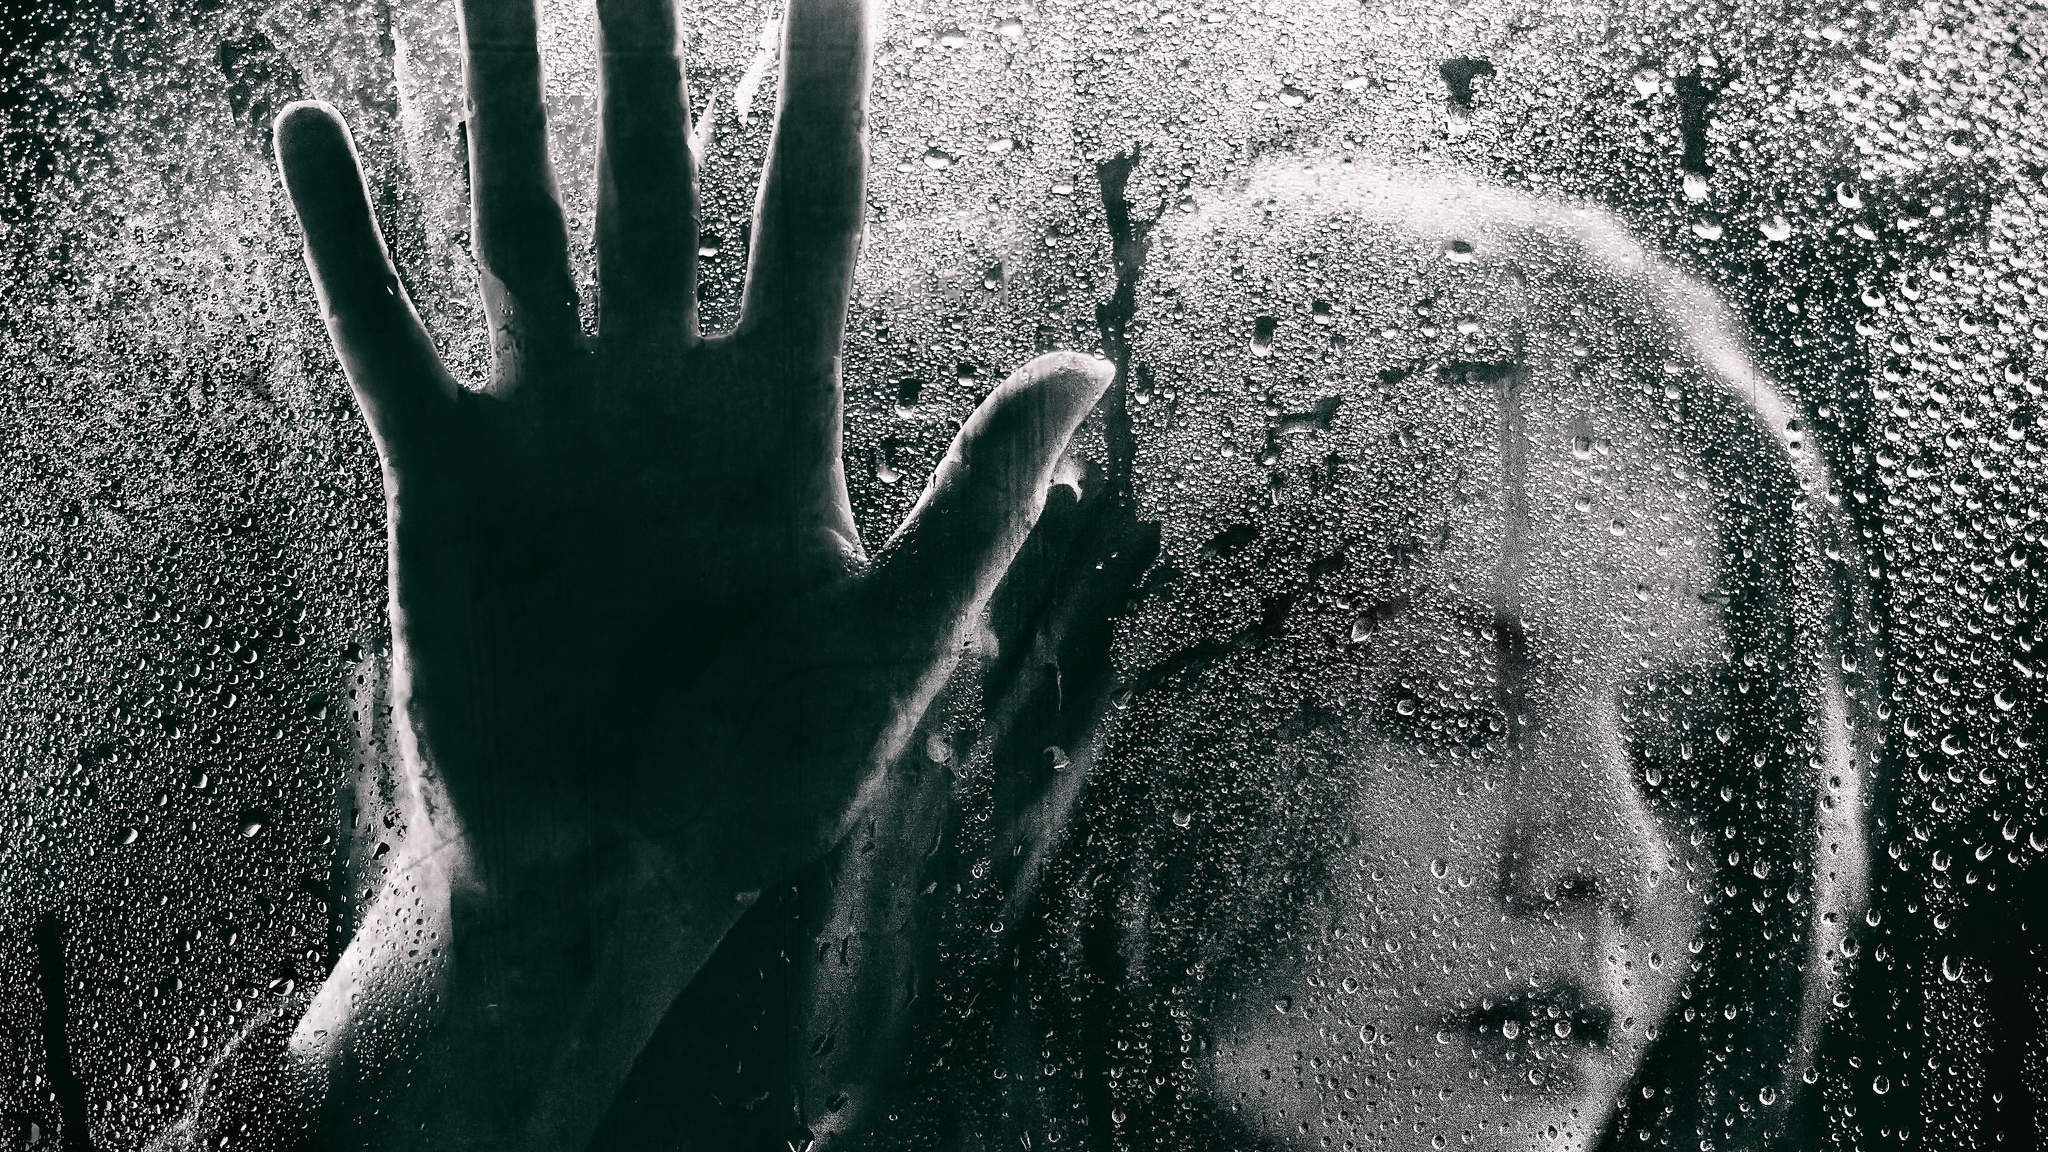 Desktop Wallpaper Mirror, Hand, Water Drops, Surface, Girl's Face, HD Image, Picture, Background, Ac4301